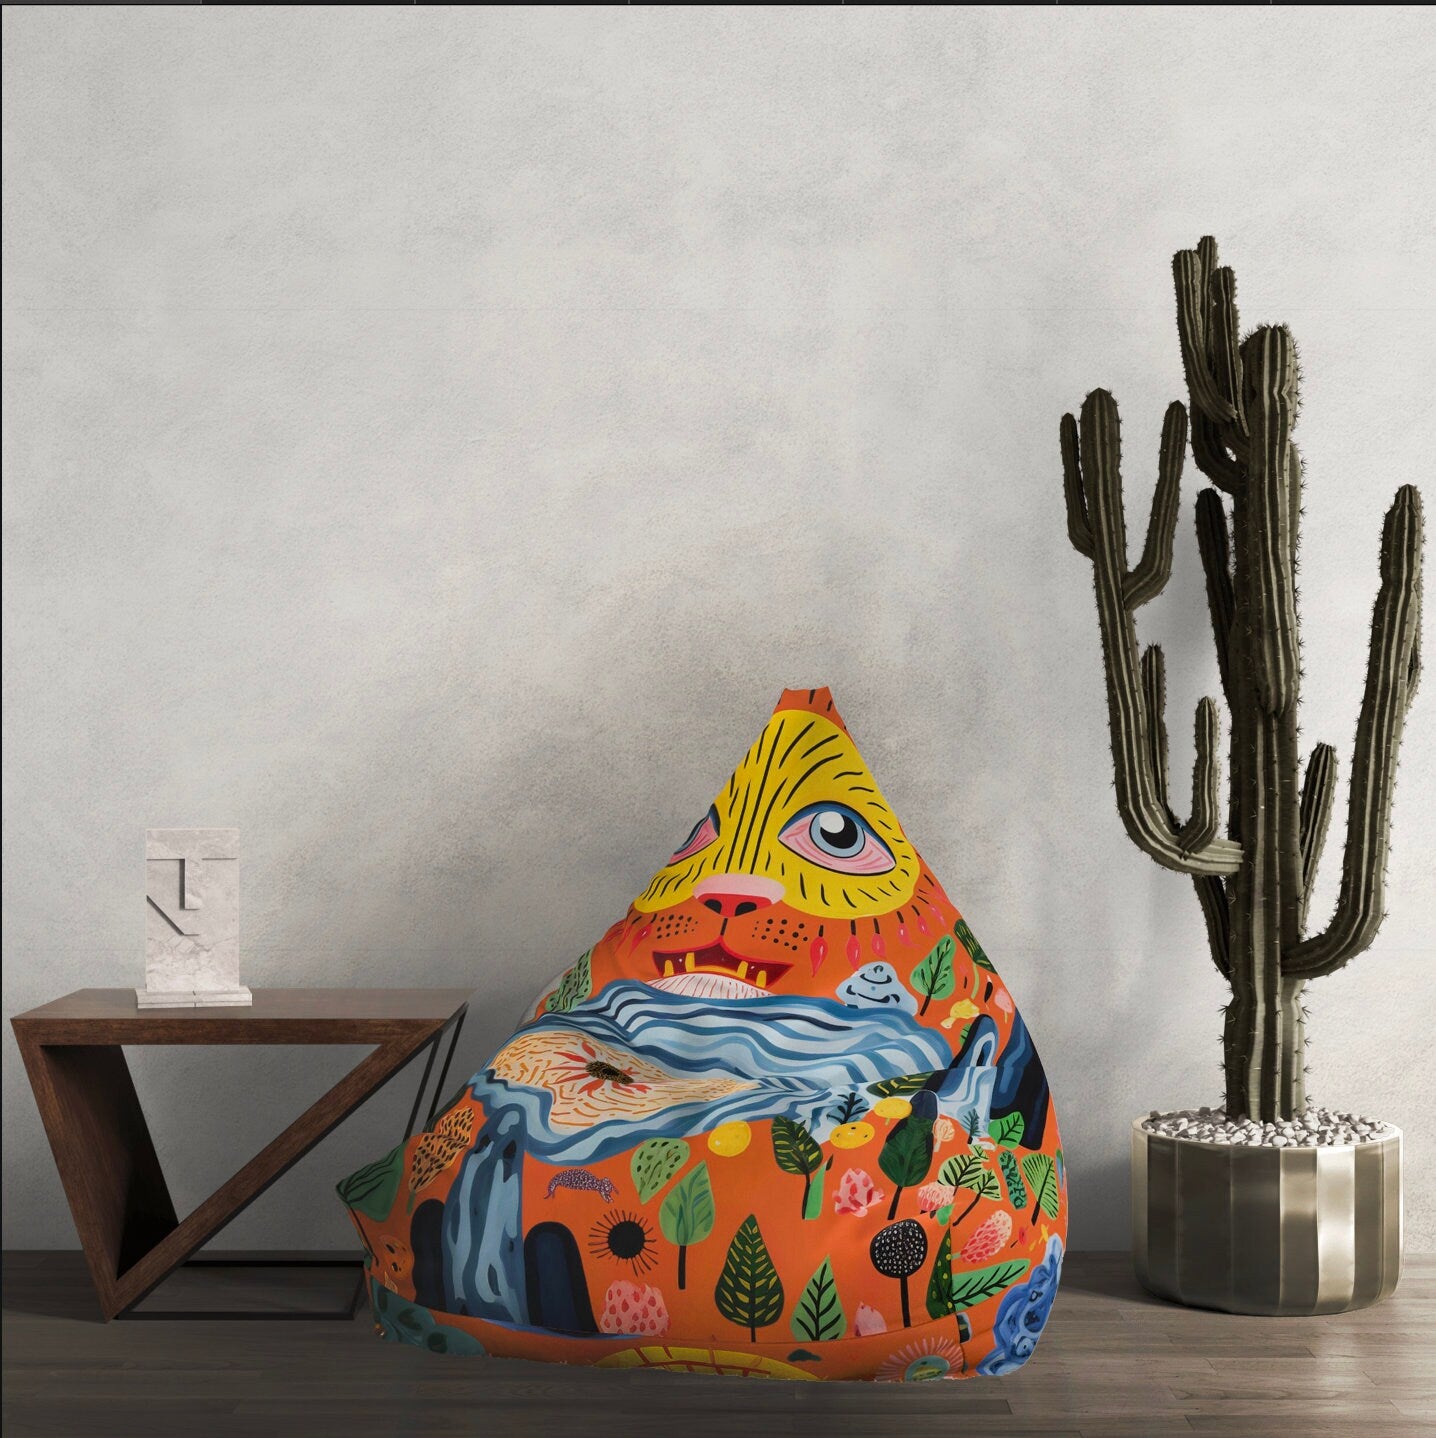 a triangle shaped pillow sitting next to a cactus